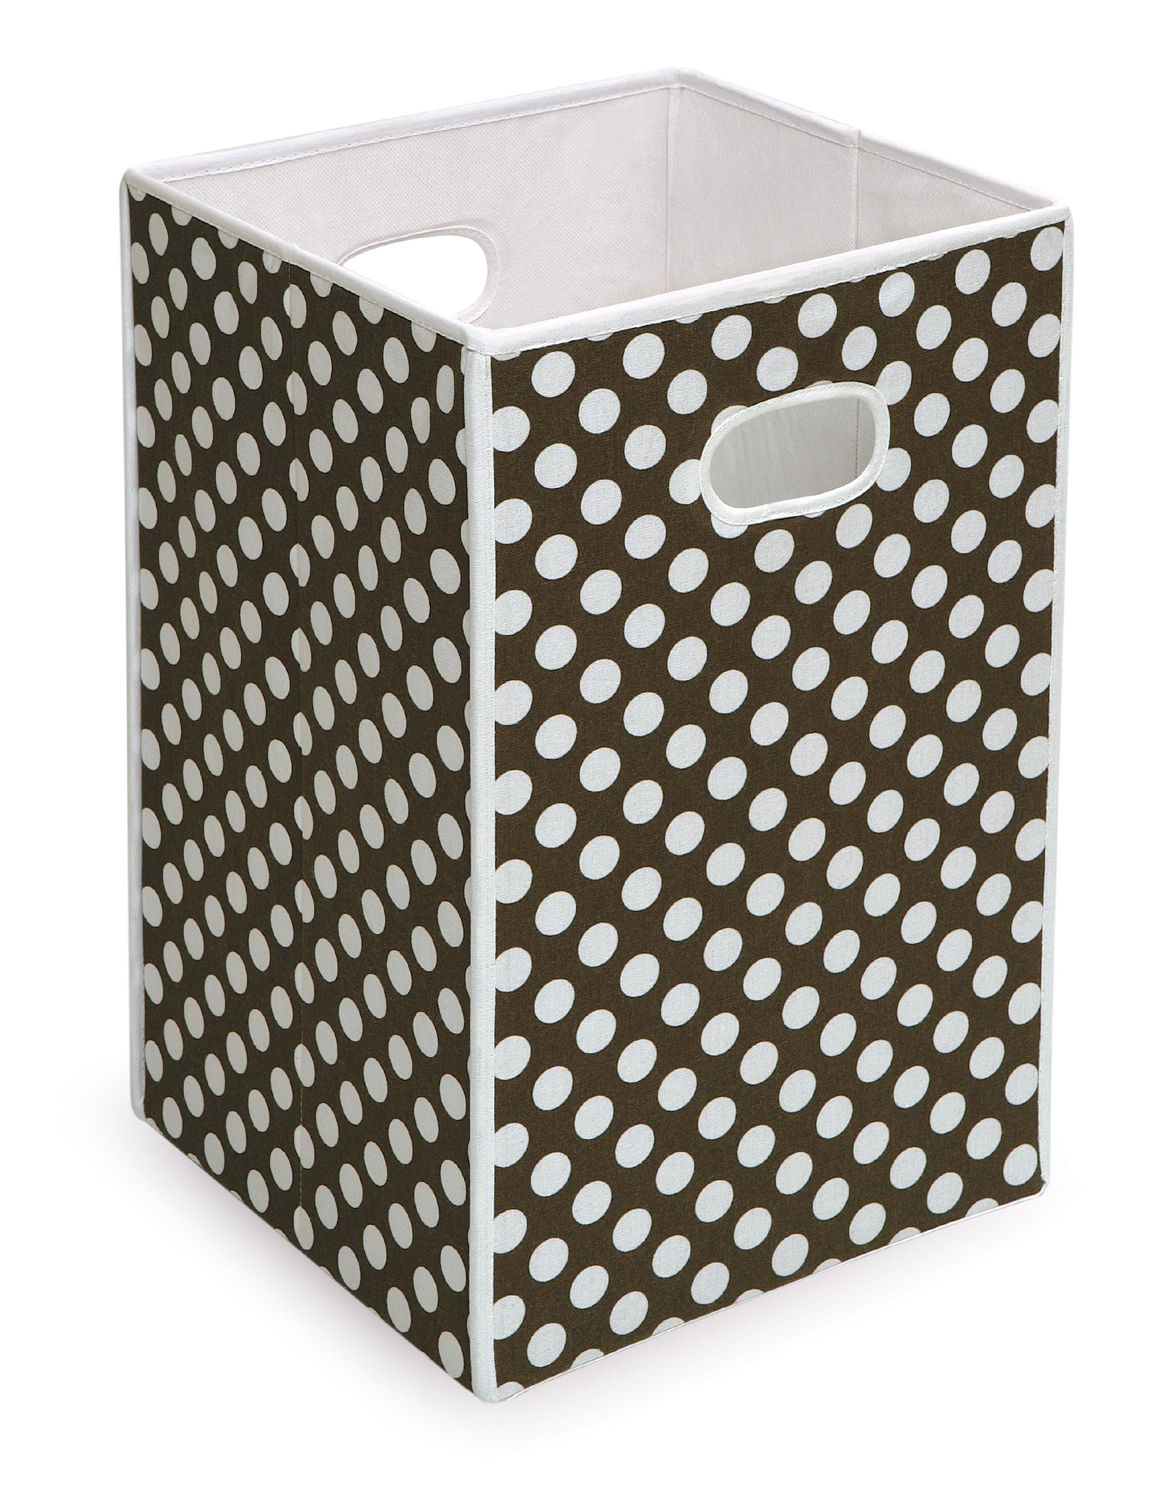 Folding Hamperstorage Bin Brown With White Polka Dots pertaining to proportions 1168 X 1500